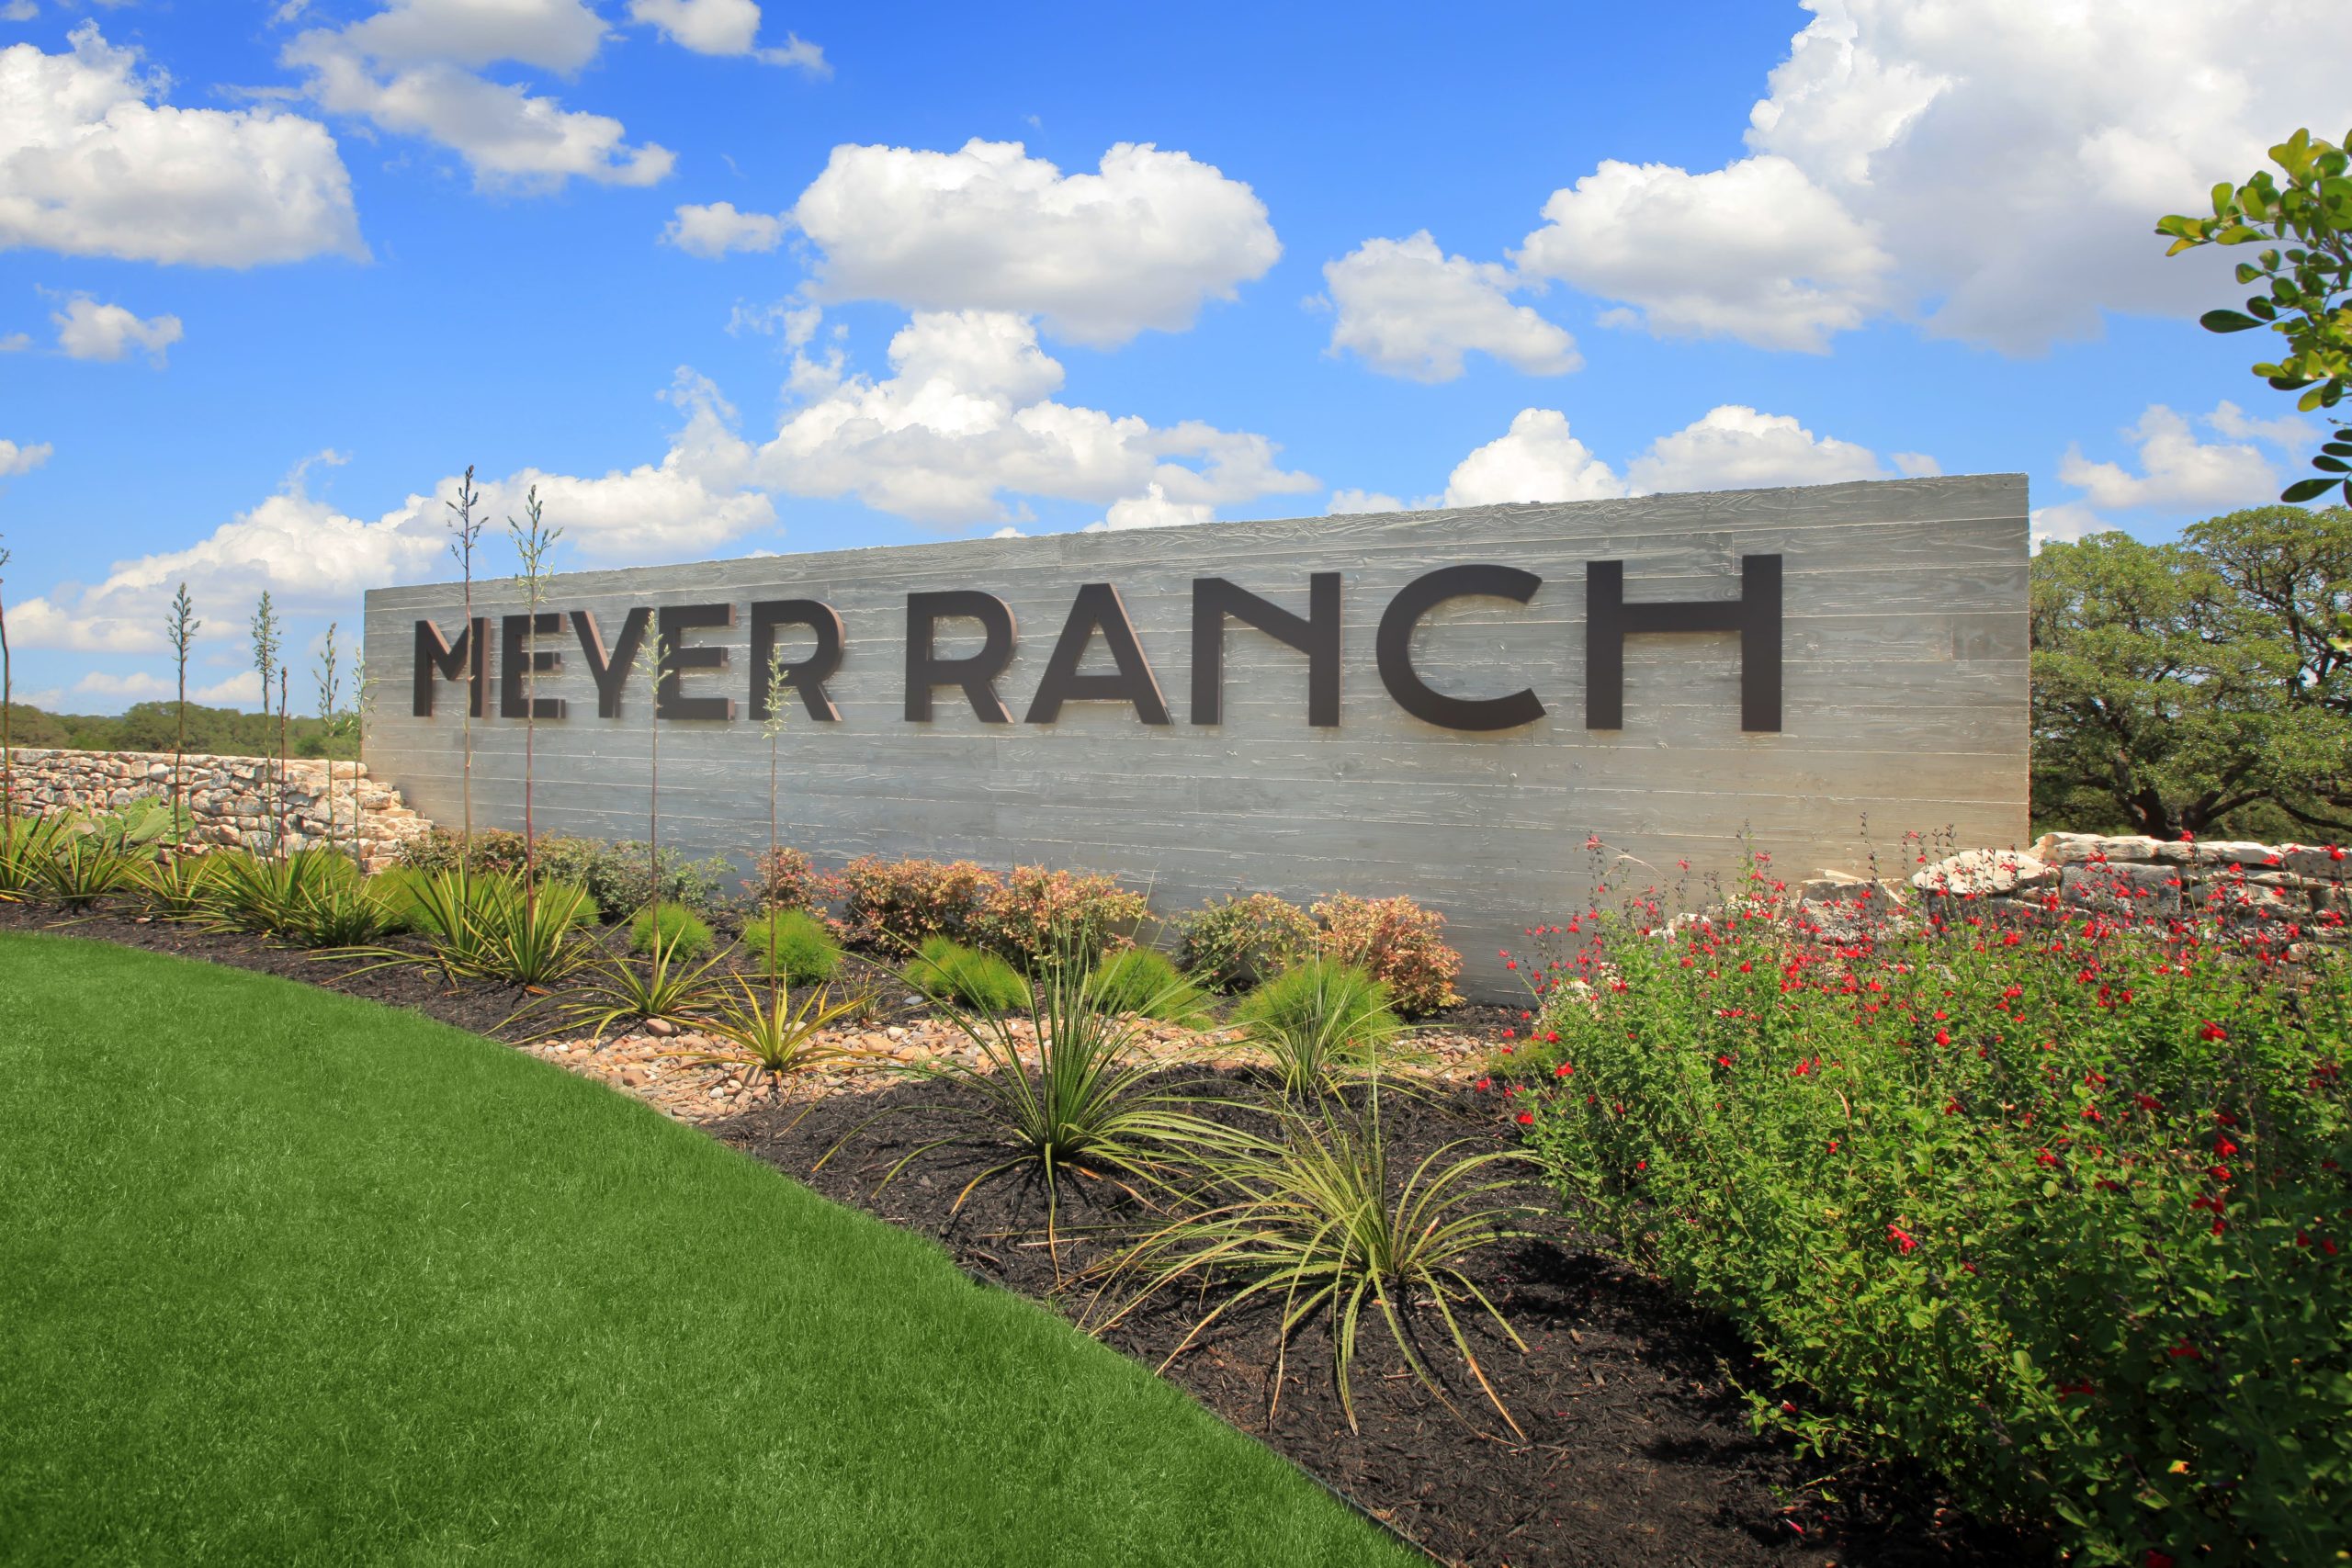 Meyer Ranch community entrance sign against blue sky filled with clouds